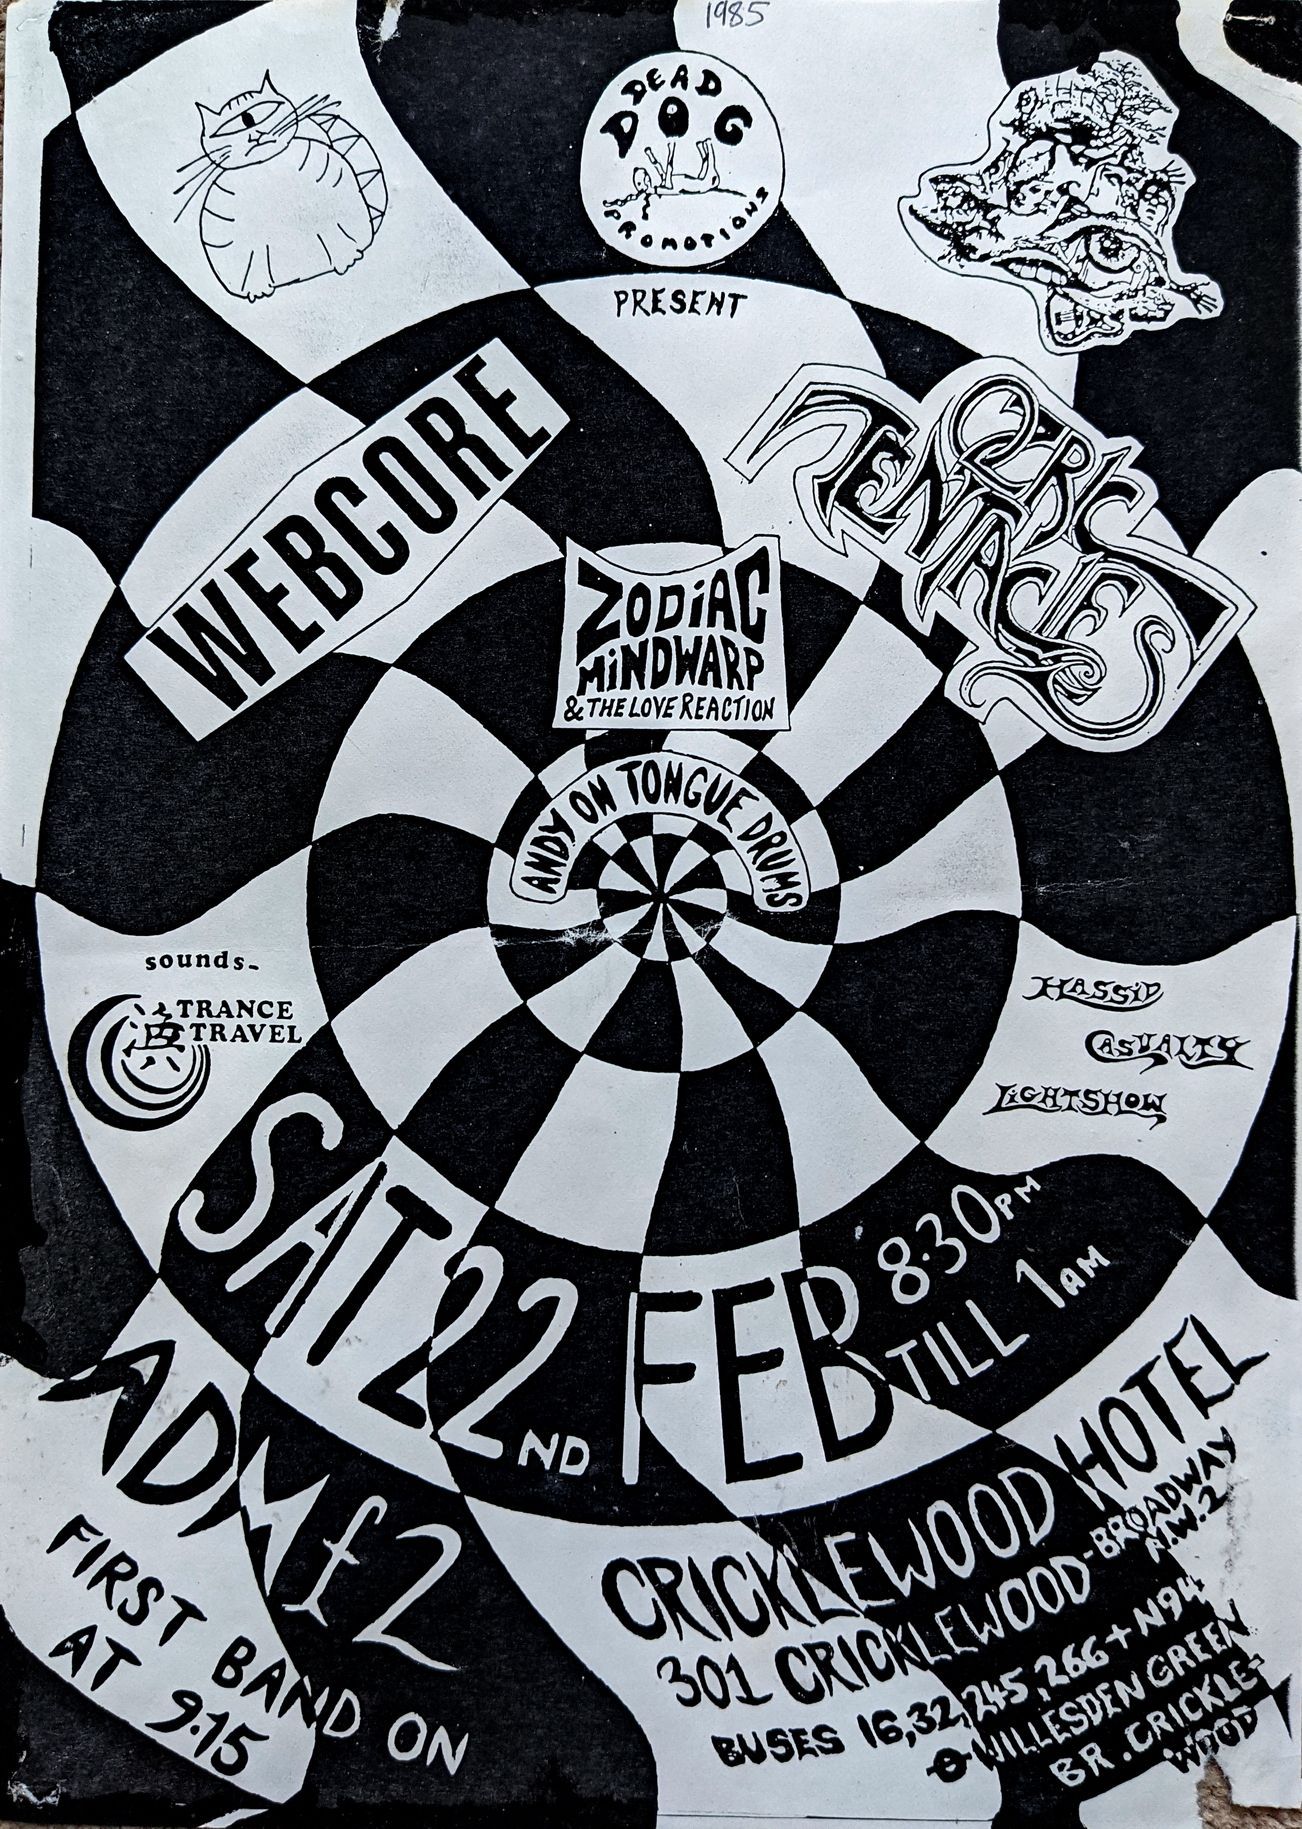 A black and white poster for a music gig at the Cricketwood Hotel. - Webcore